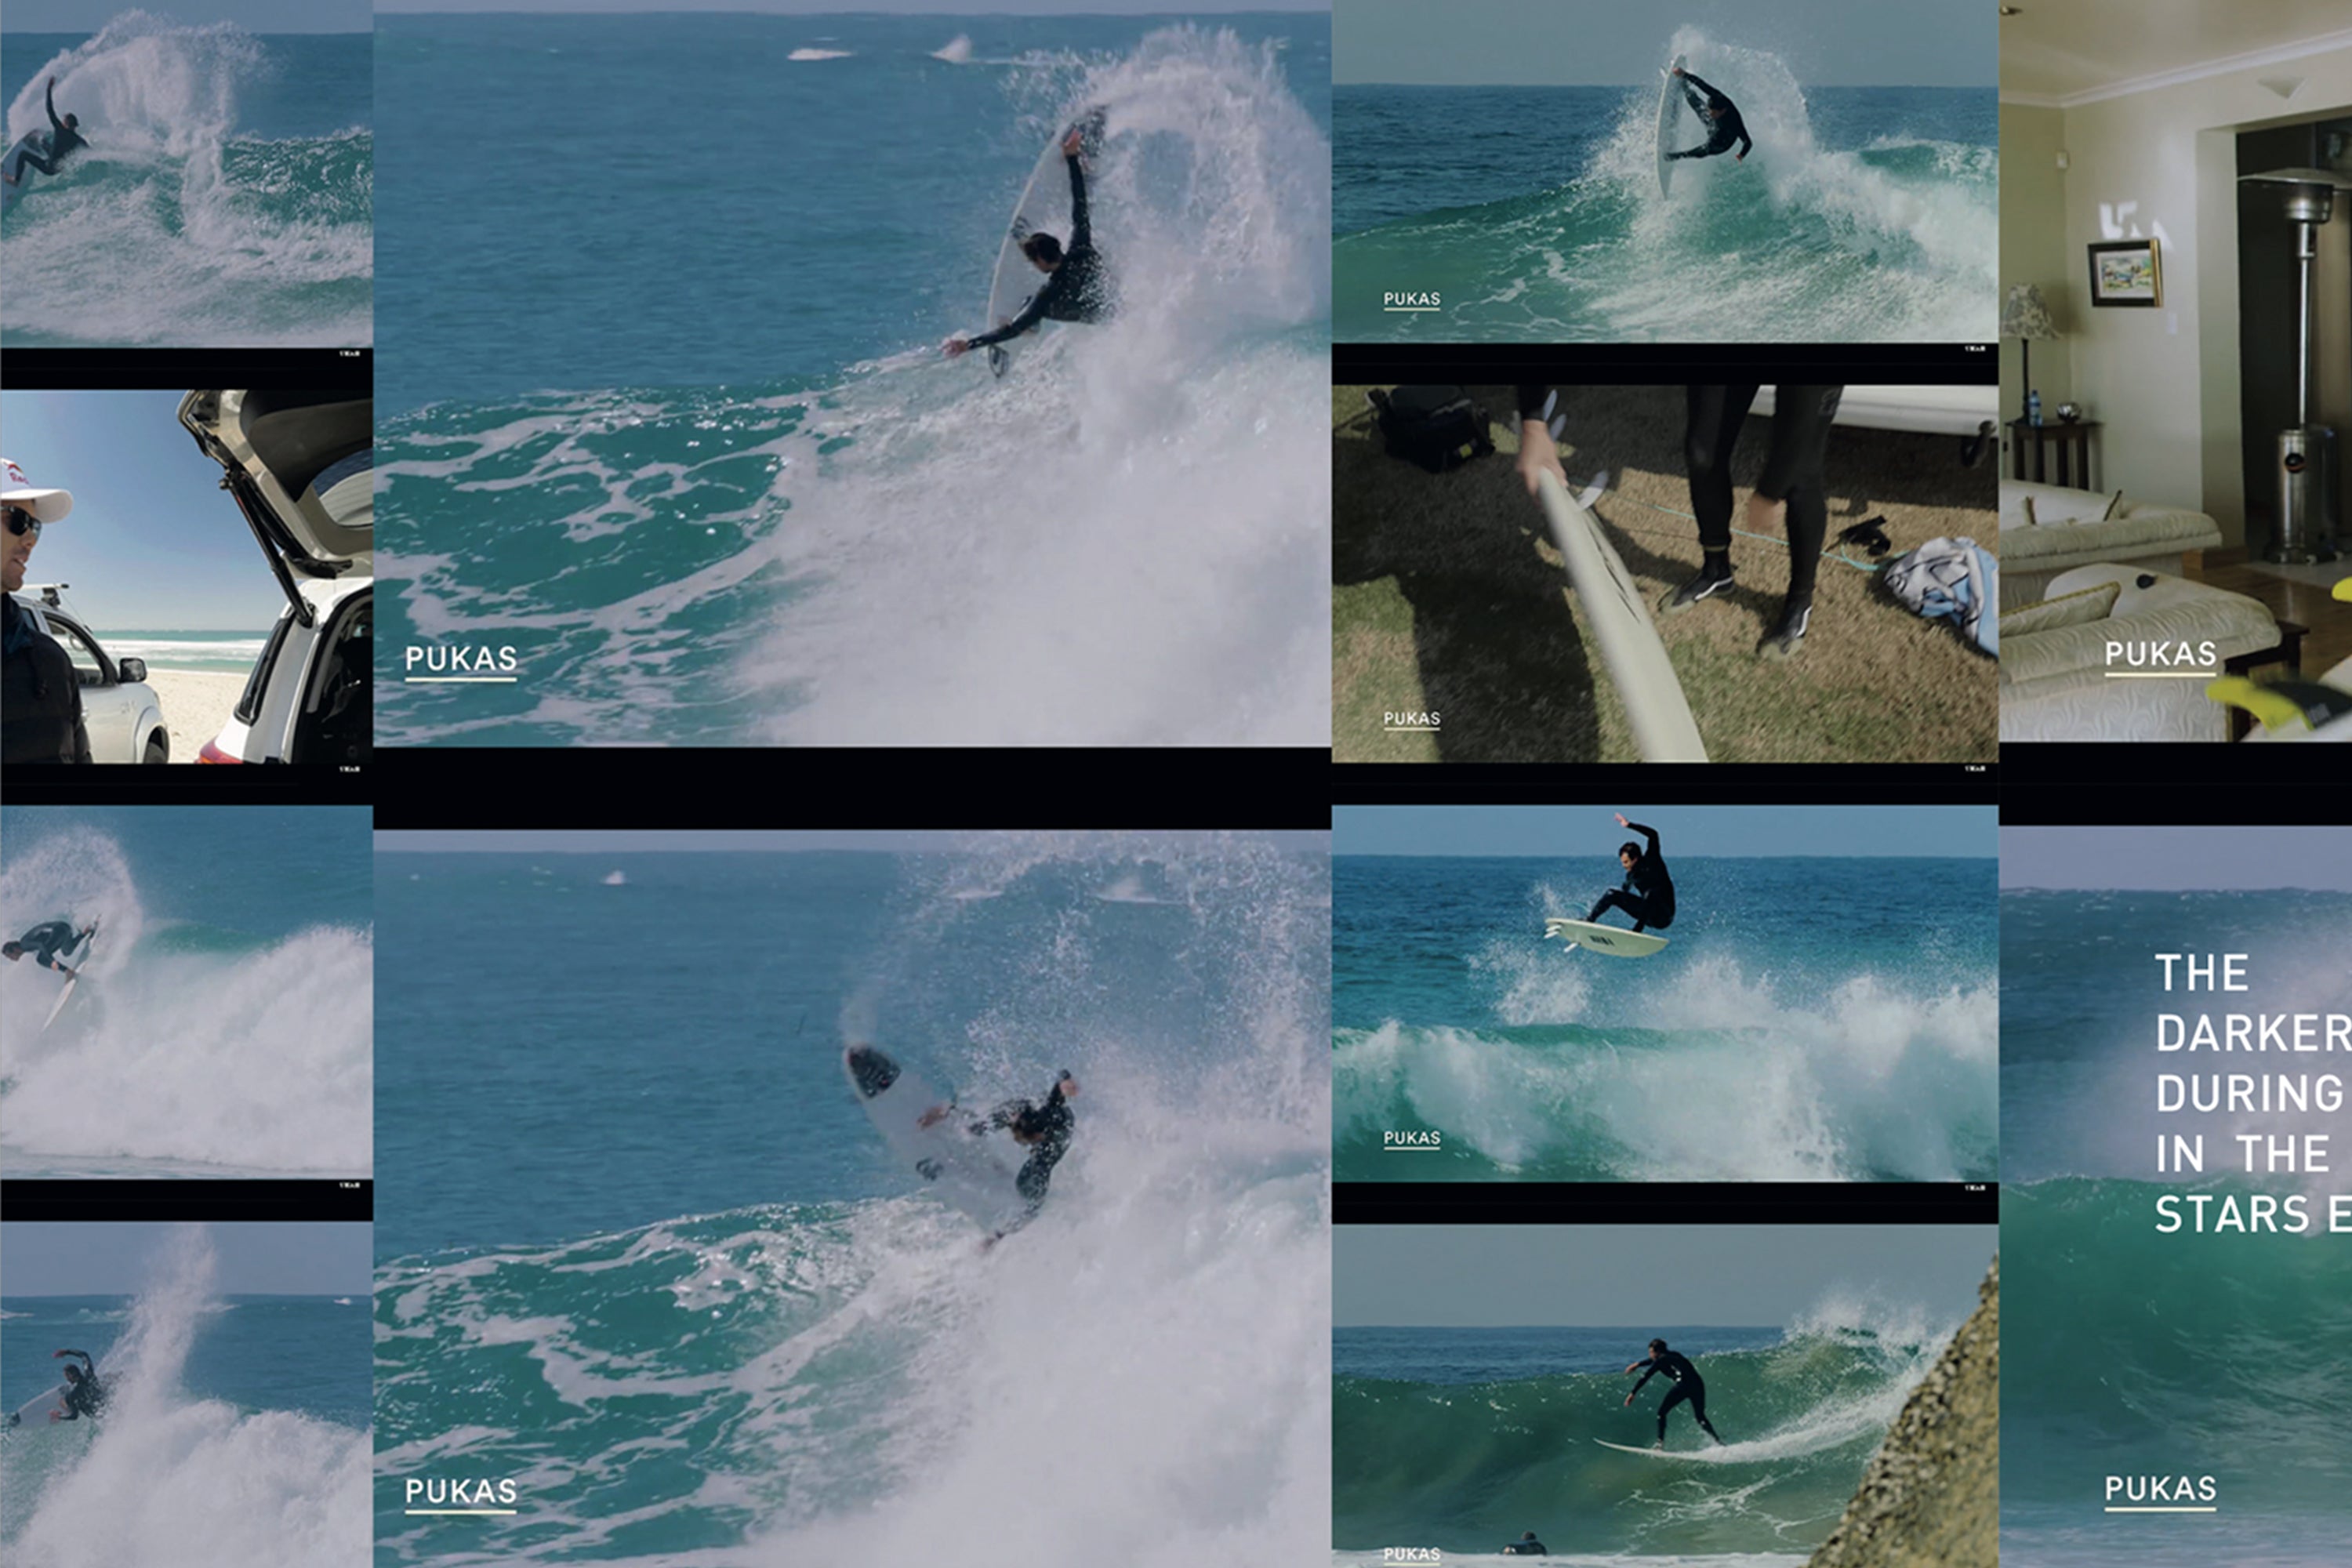 Pukas Darker as seen in Stab in the Dark All Stars Edition with Dane Reynolds and Jordy Smith